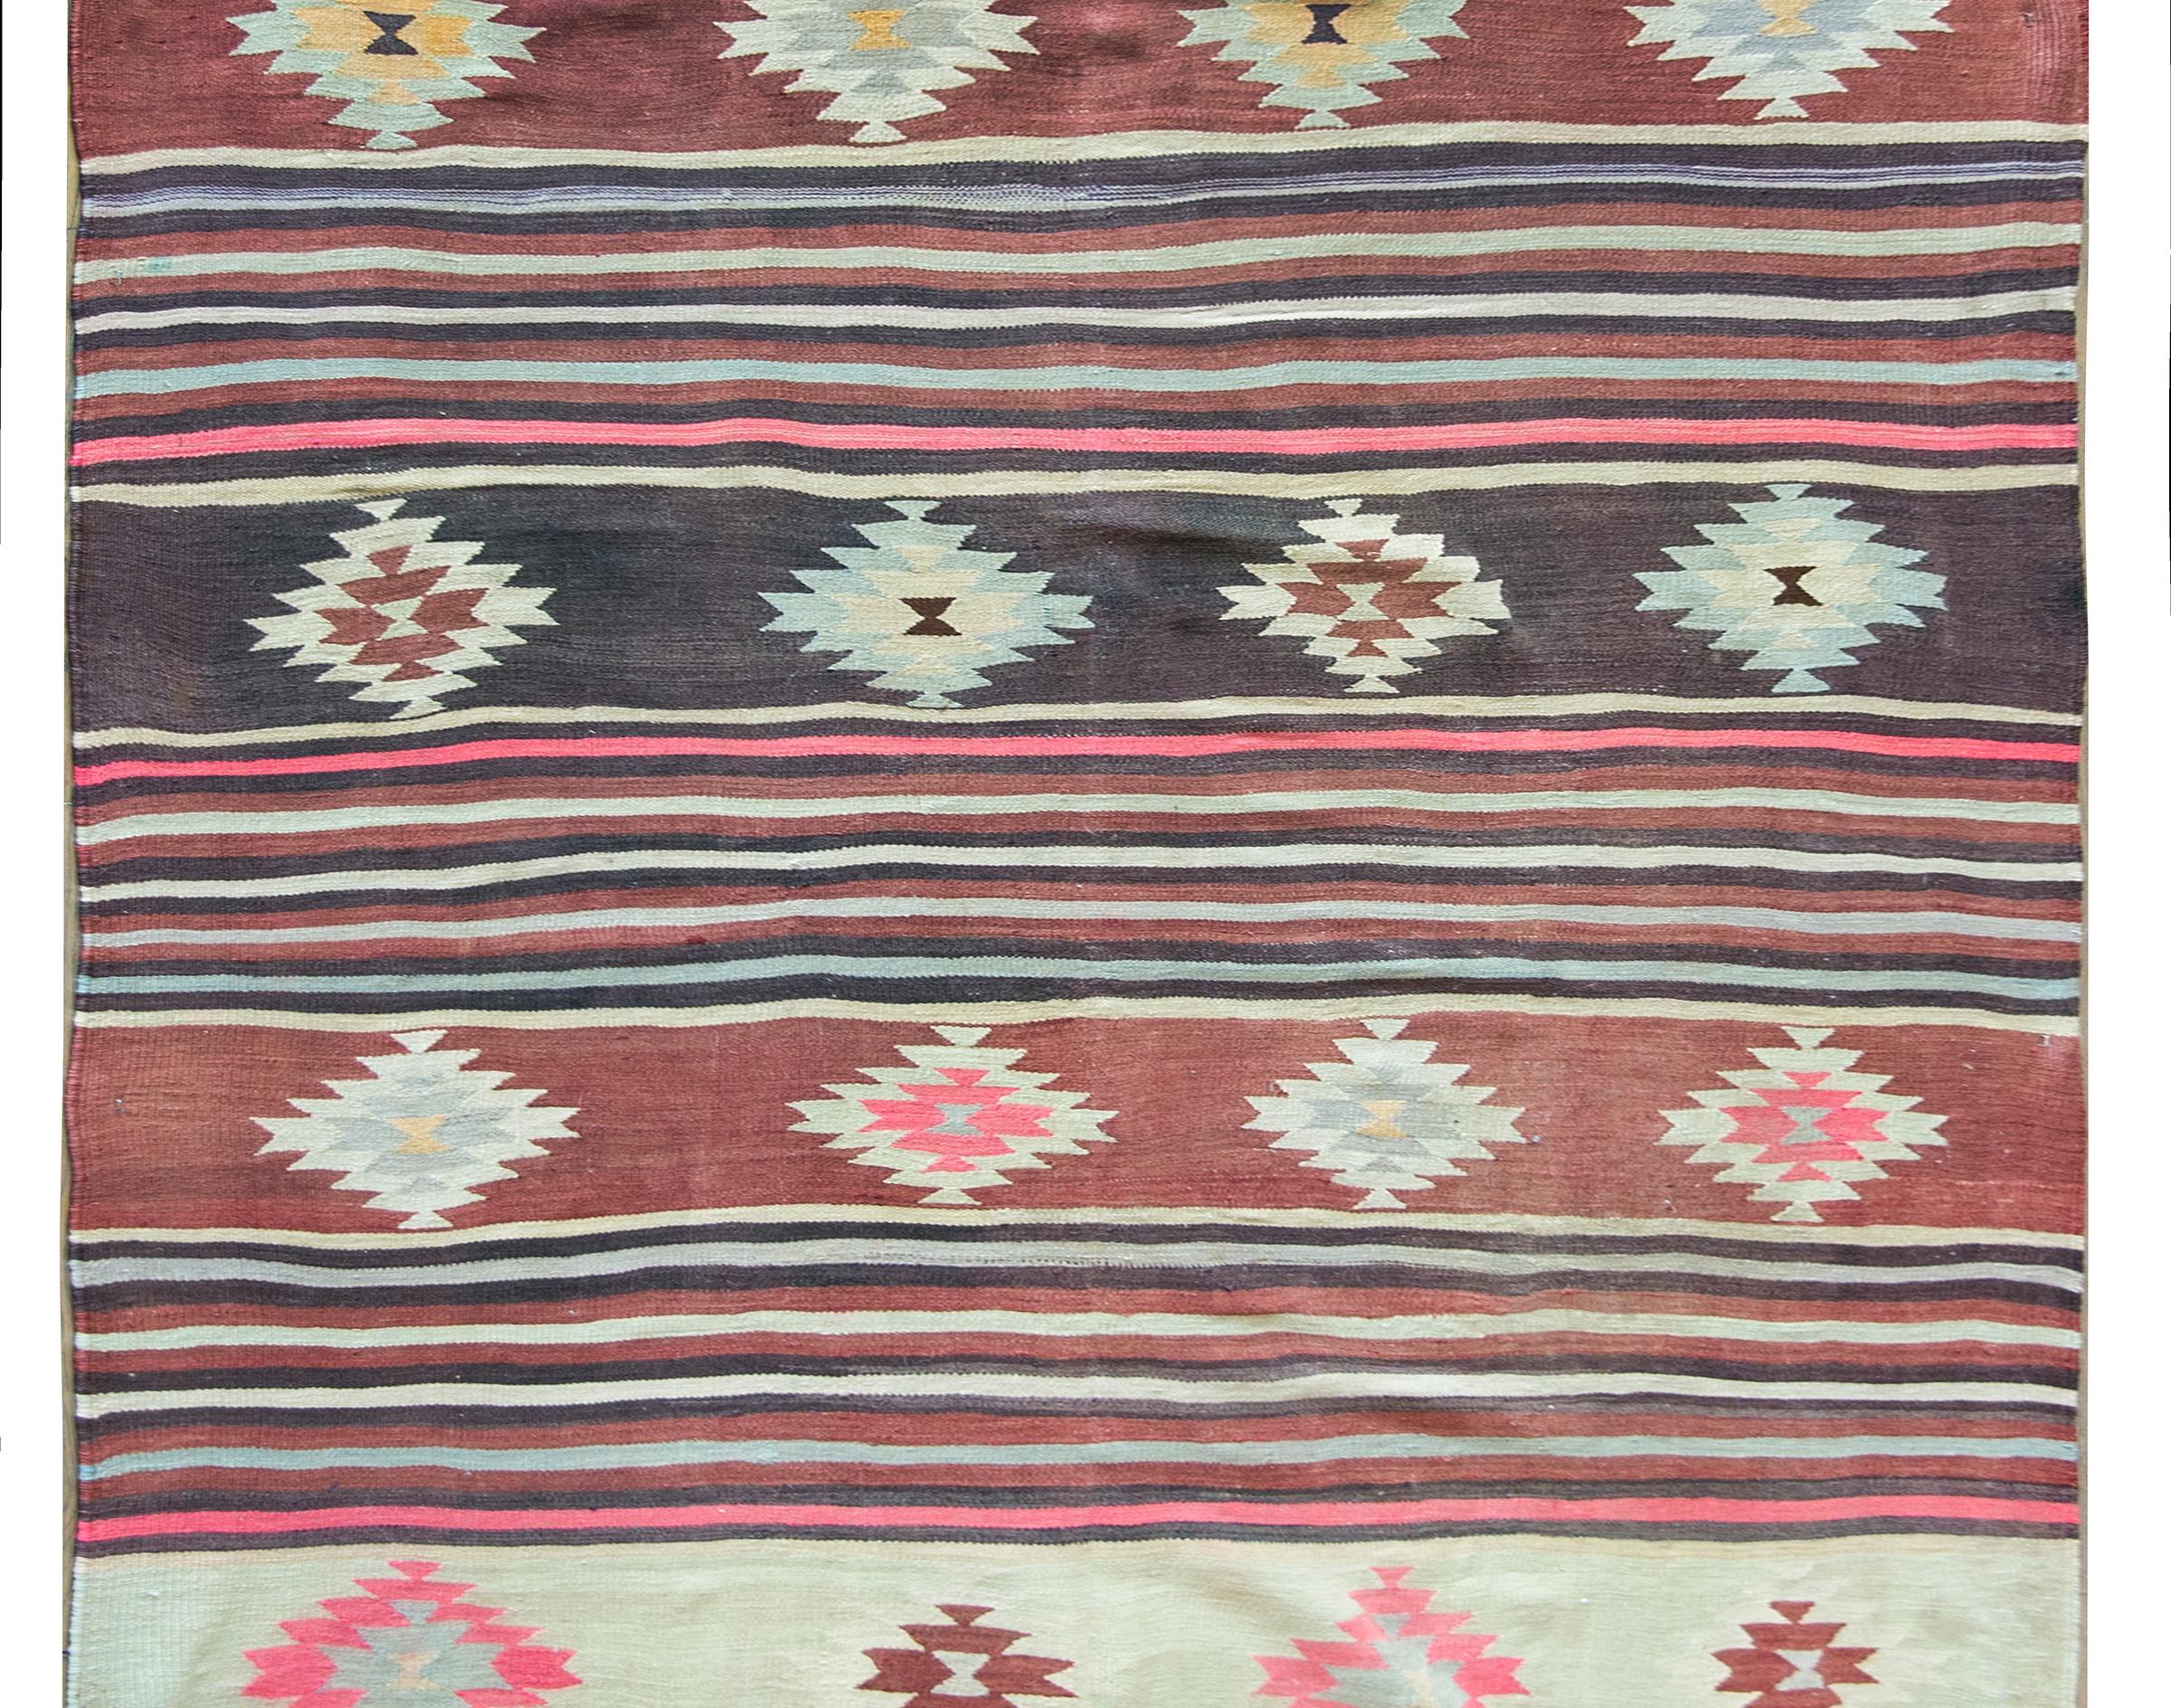 A wonderful vintage Turkish Bergama kilim rug with a striped pattern of alternating thin violet, cranberry, cream, and gold colored stripes, with wider cream colored stripes with diamond medallions.